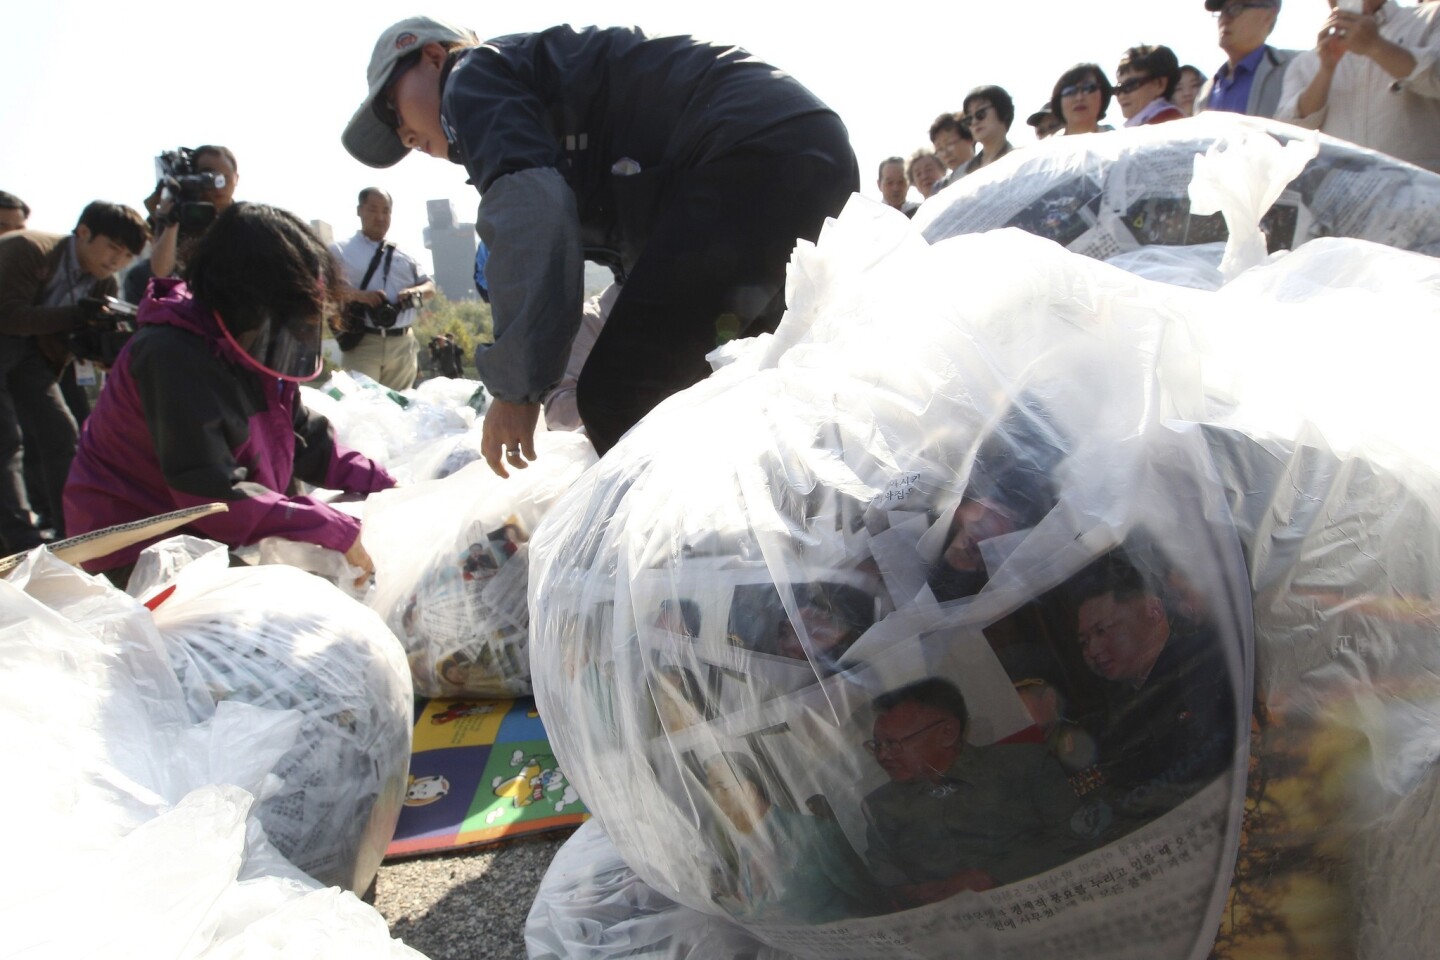 North Korean defectors in Paju, South Korea, prepare plastic bags containing leaflets condemning North Korean leader Kim Jong Un and his policies. The leaflets were attached to balloons and dropped over the border on Oct. 10.